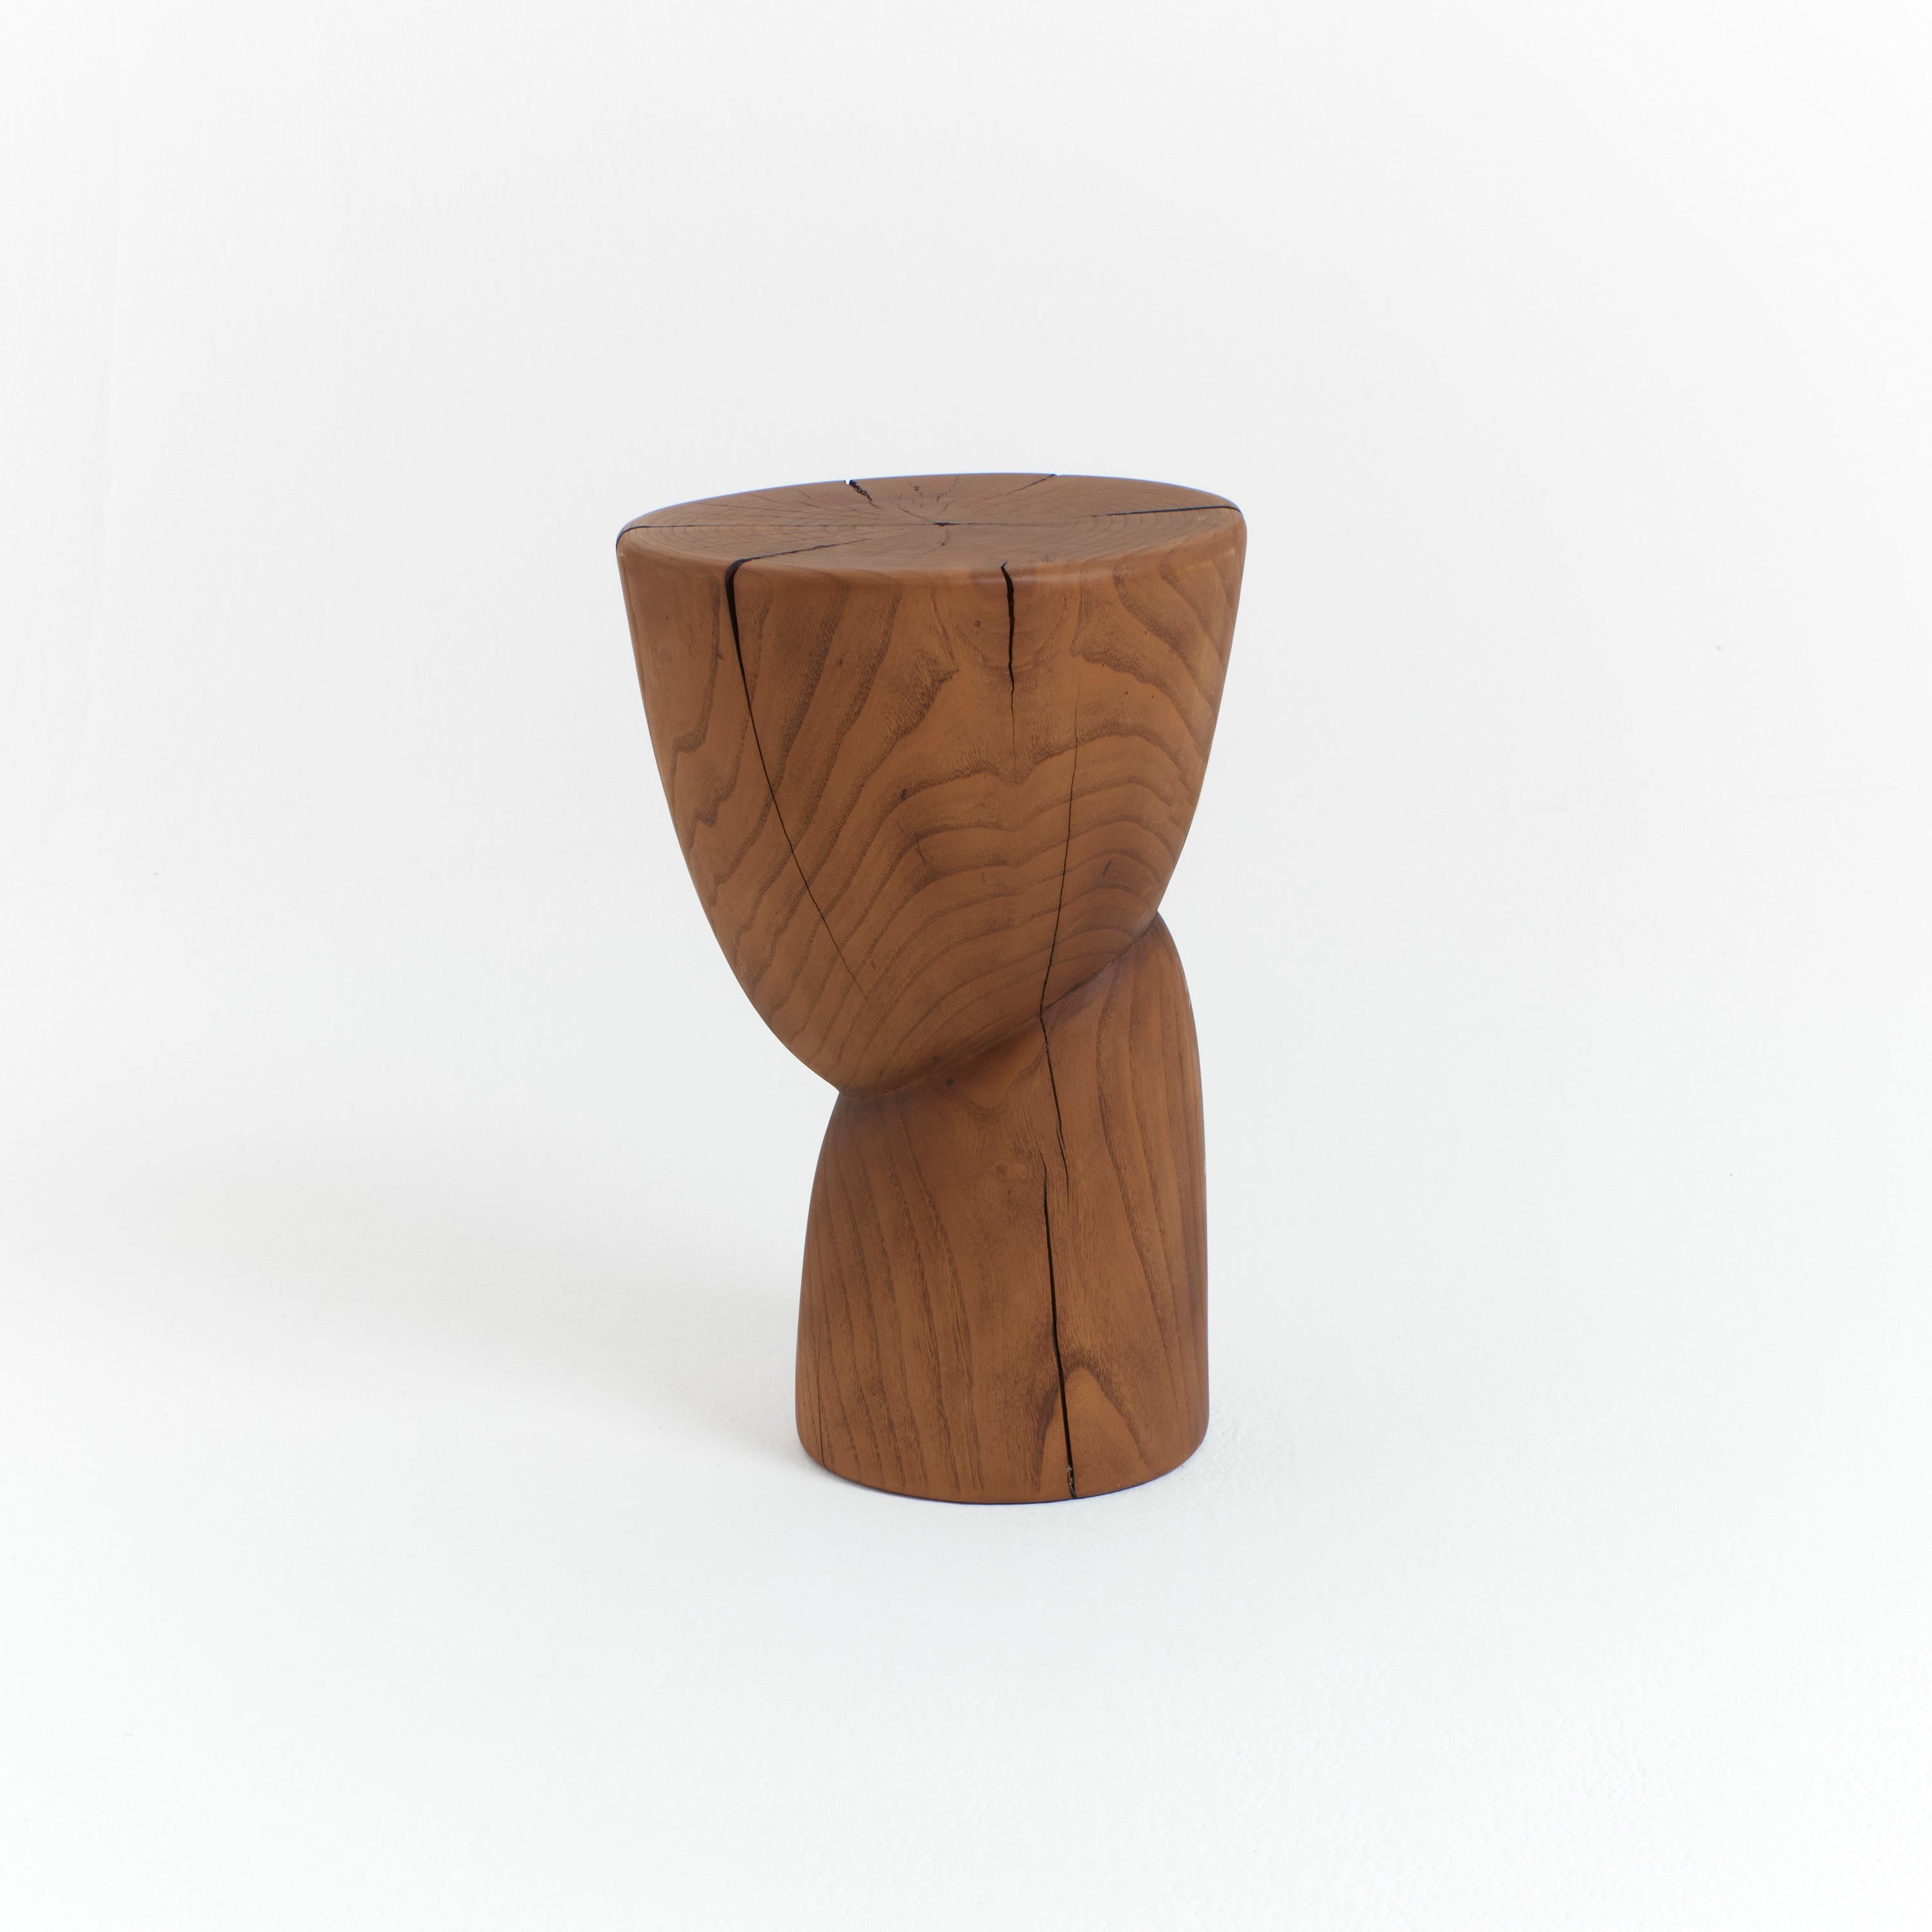 Wooden side table in solid wood with an oiled finish.
Designed by Project 213A in 2020 
This sculptural side table is hand carved by local artisans in Portugal using solid chestnut which shows the natural grain and characteristics of the